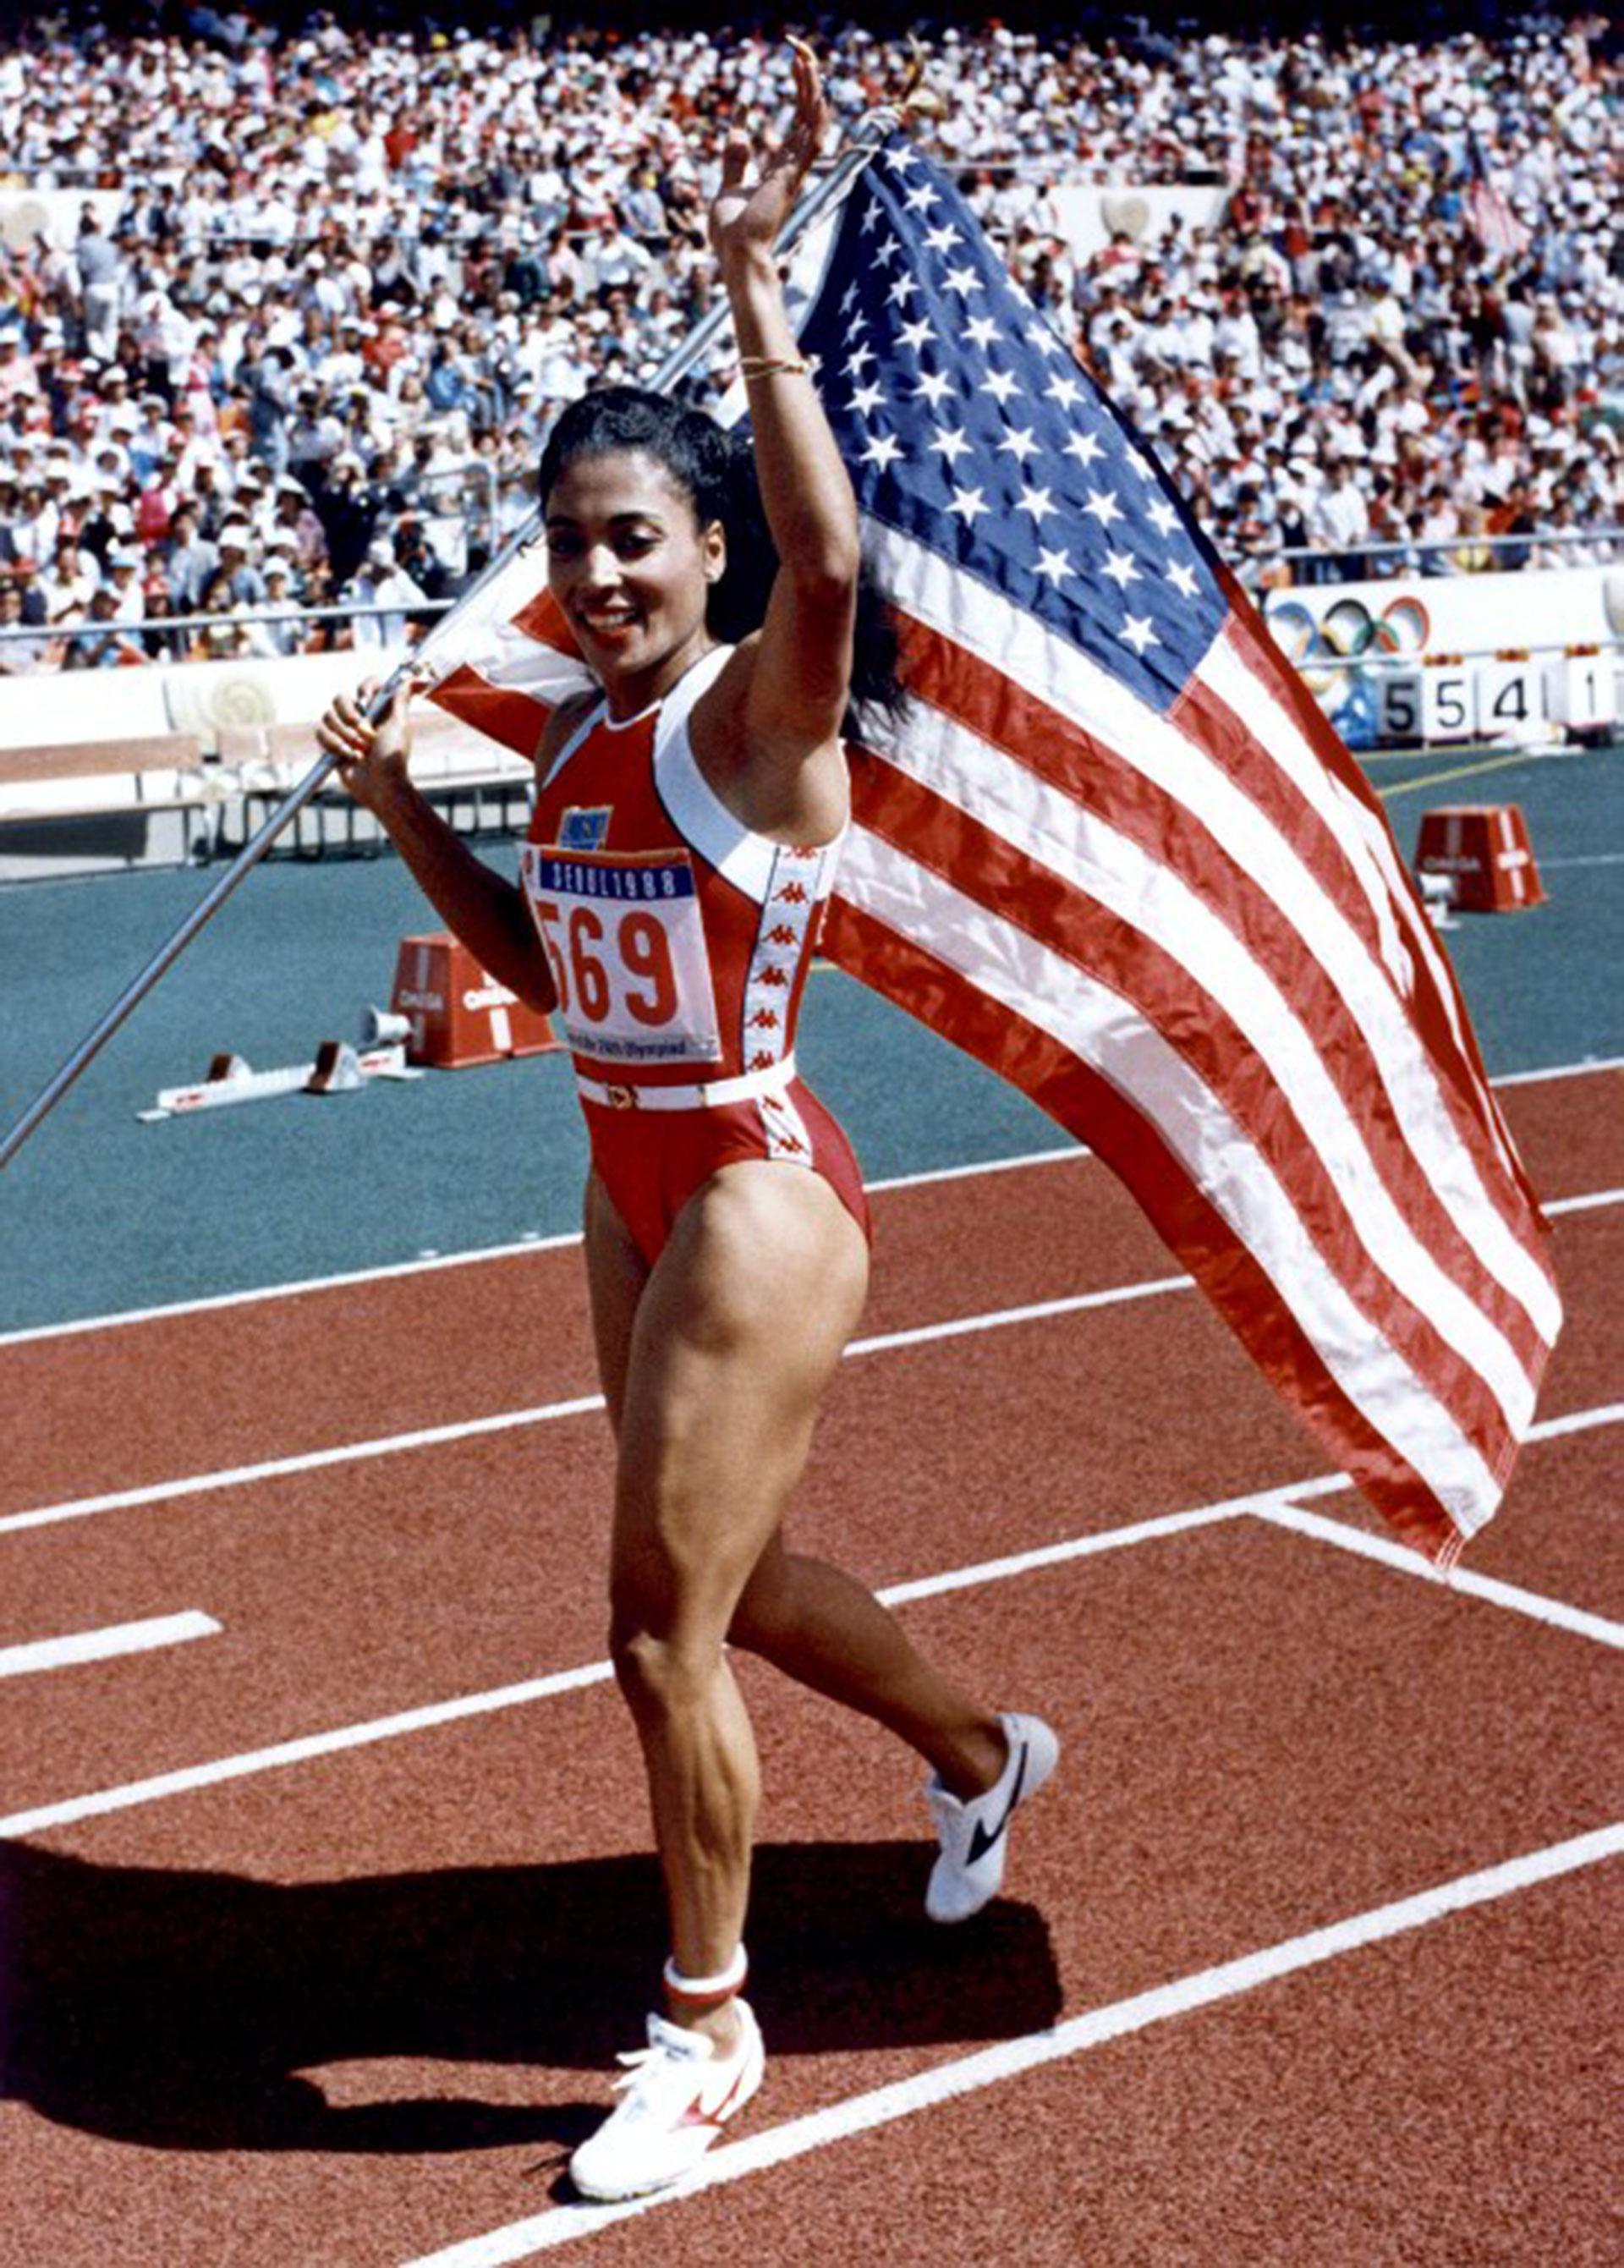 The American Florence Griffith Joyner waves at the crowd as the carries the American flag after setting a new Olympic record and winning the gold for her 10.54 performance at the 100 meters race of Seoul Olympic Games. The American Evelyn Ashford won the silver medal and the German Heike Drechsler won the bronze.(FILM)  AFP PHOTO / AFP PHOTO / IOPP / RON KUNTZ